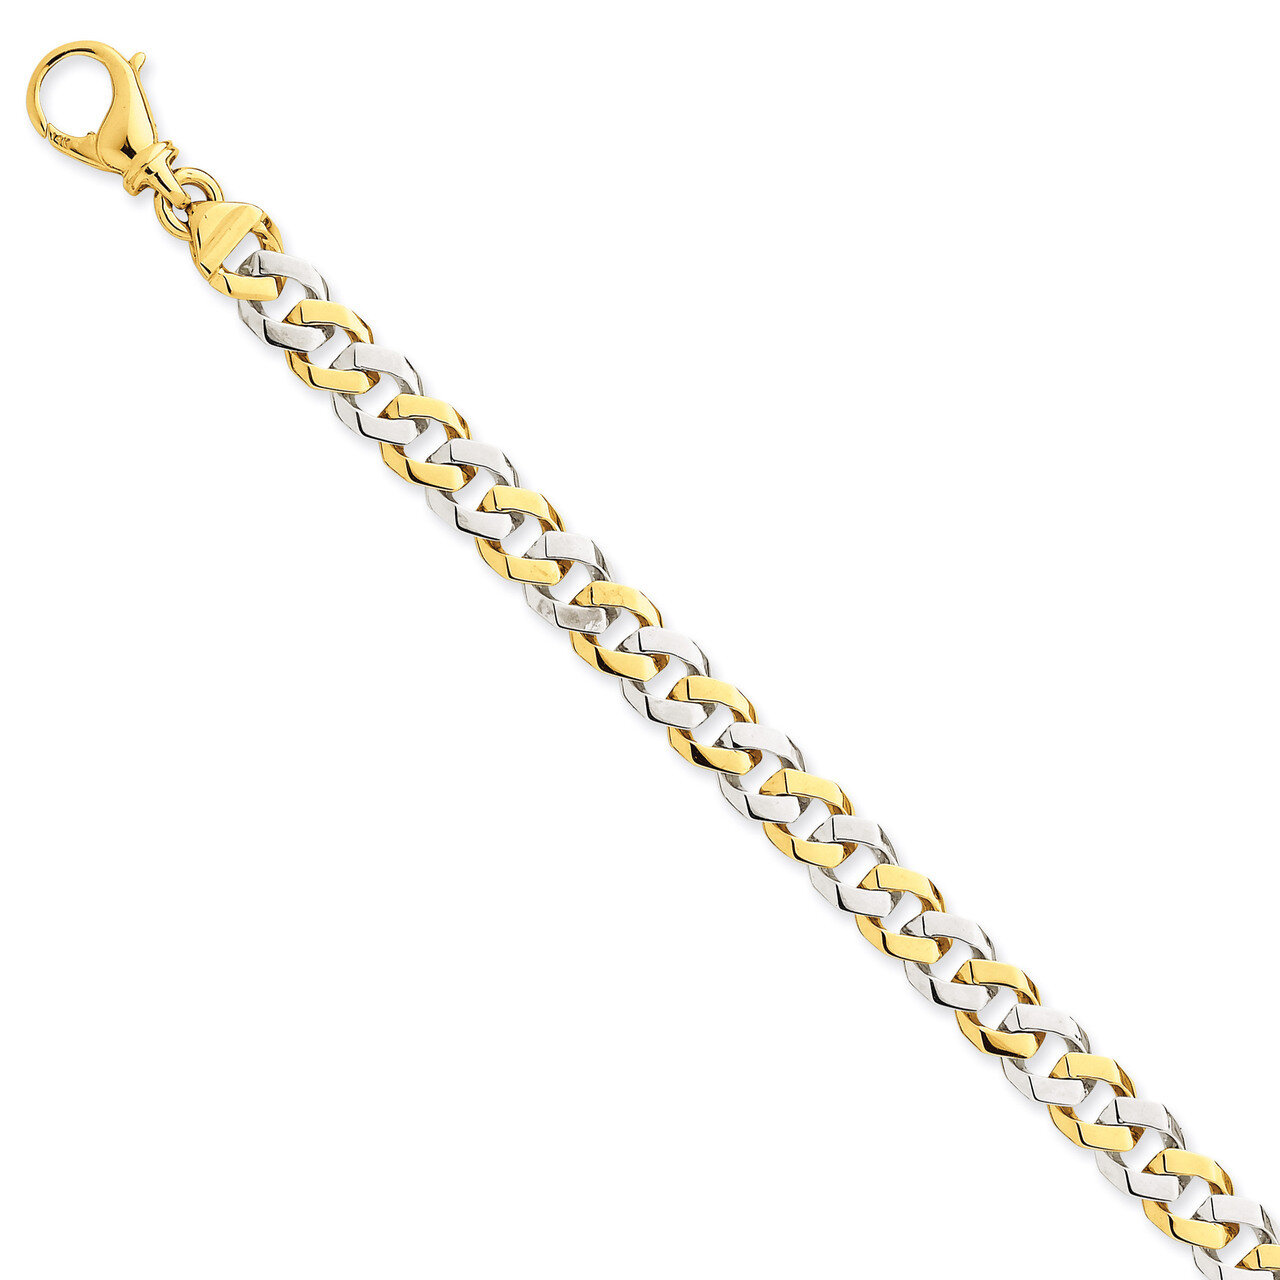 7.85mm Polished Fancy Link Chain 24 Inch 14k Two-Tone Gold LK515-24